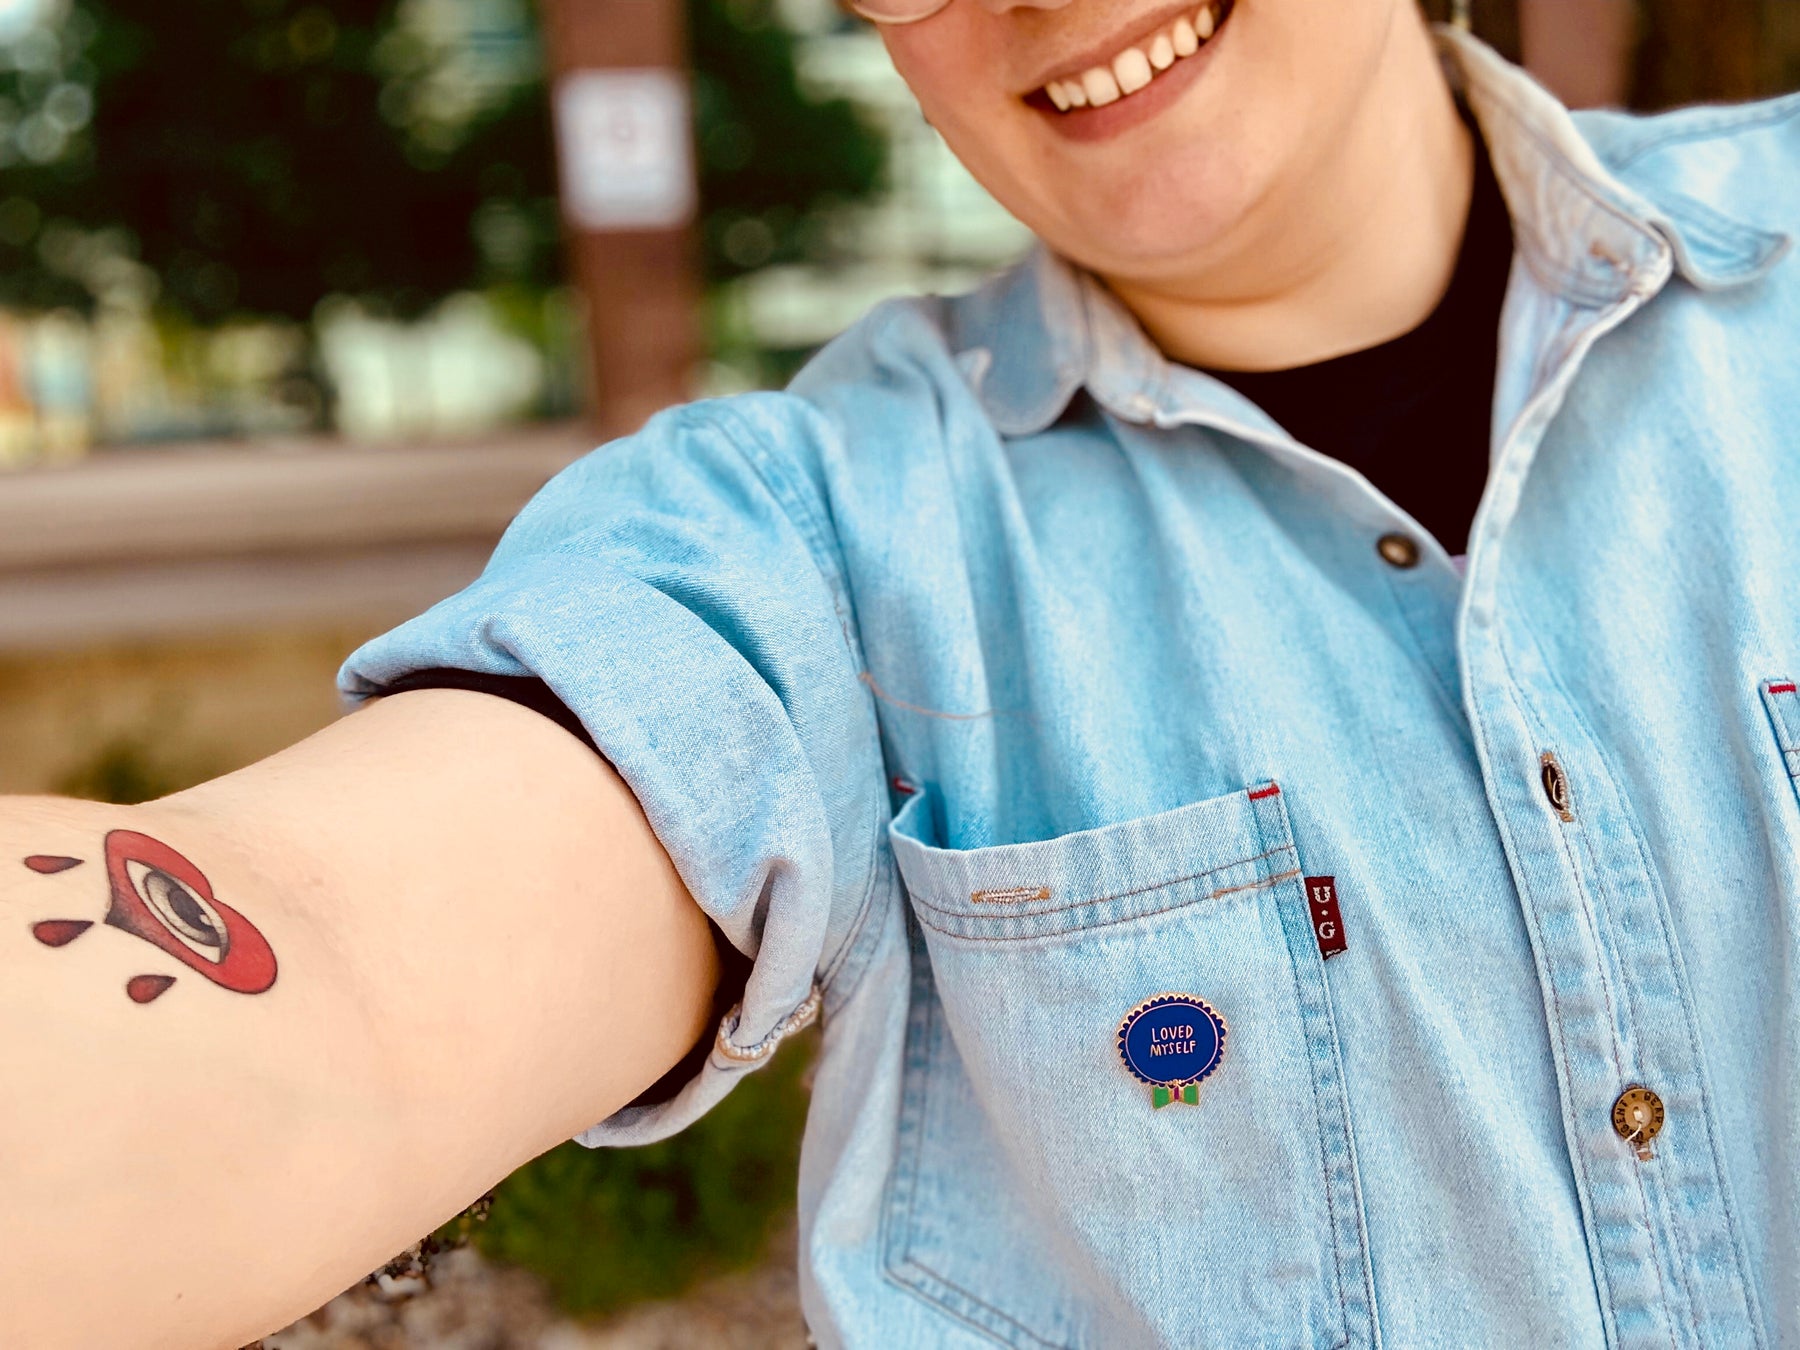 Person wearing a Loved Myself pin on a denim shirt